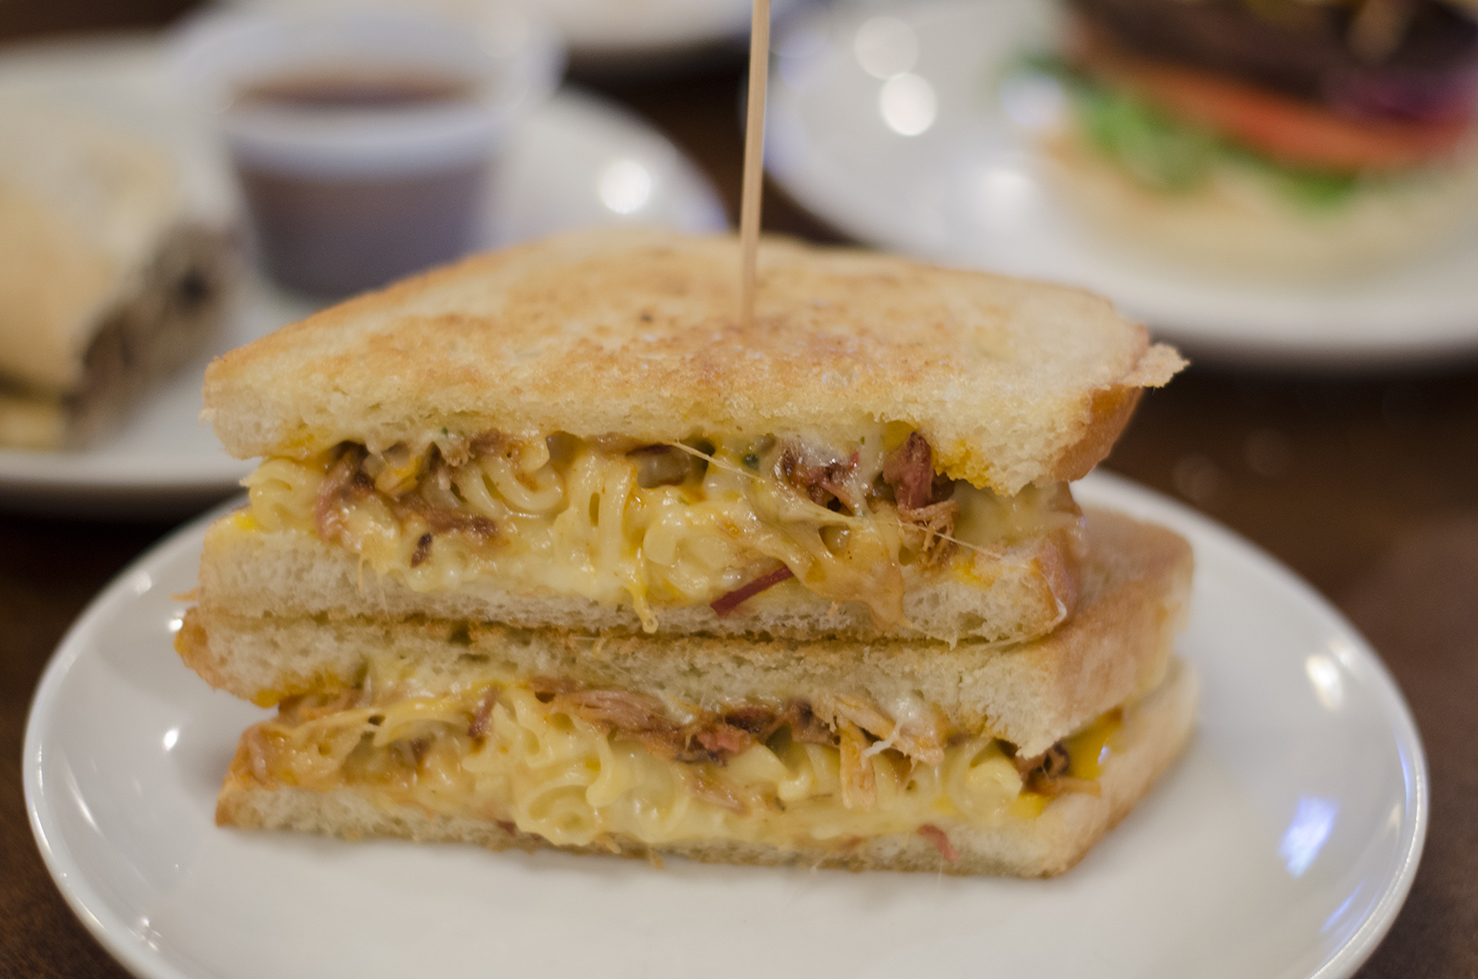 Who doesn't love a good grilled cheese sandwich?